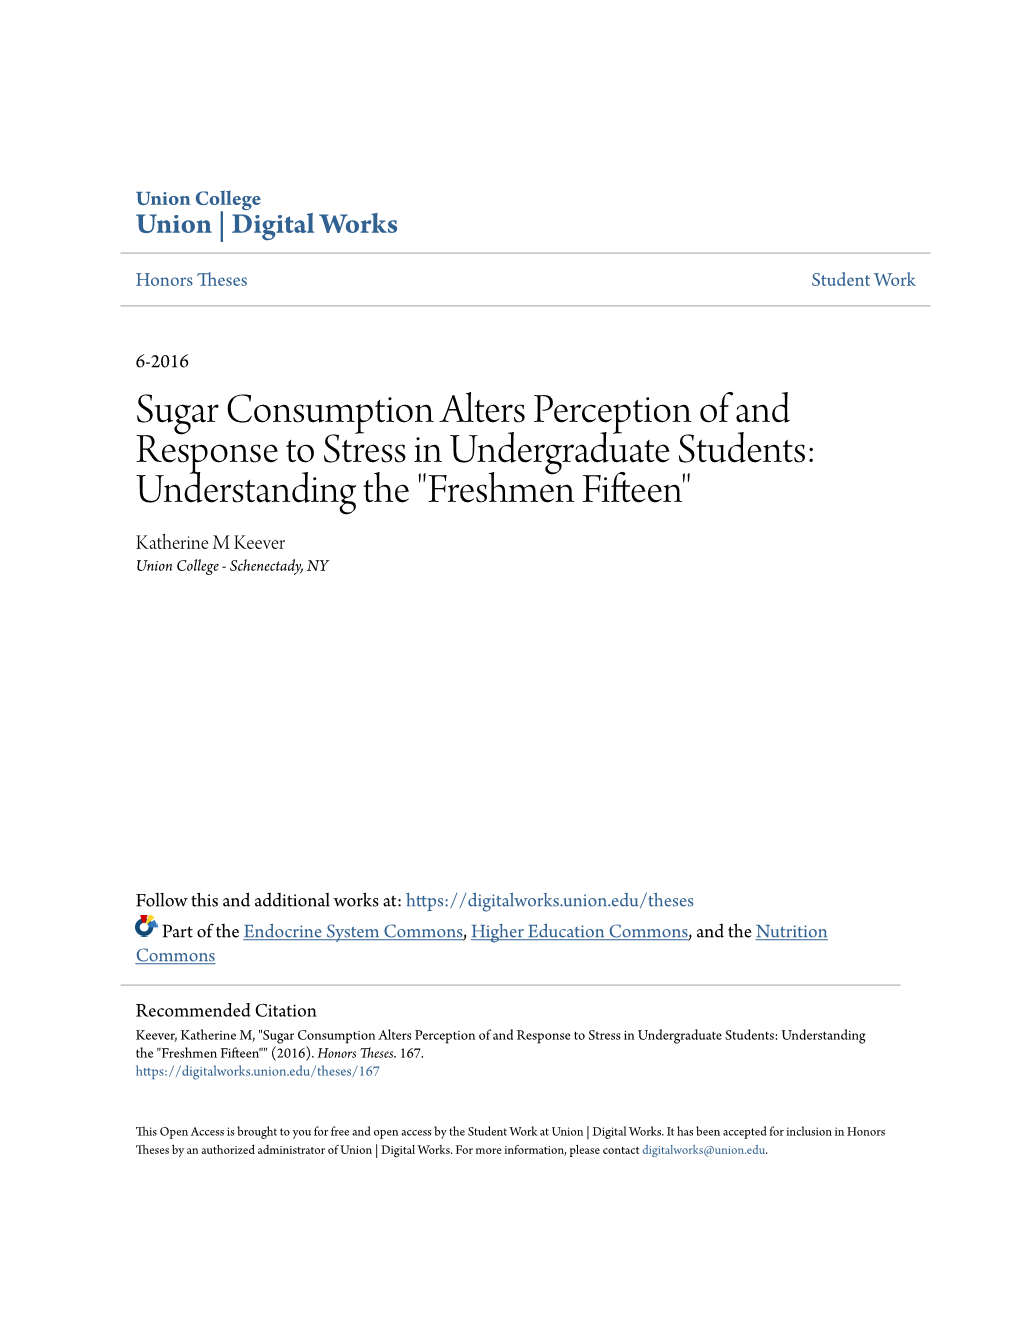 Sugar Consumption Alters Perception of and Response to Stress In